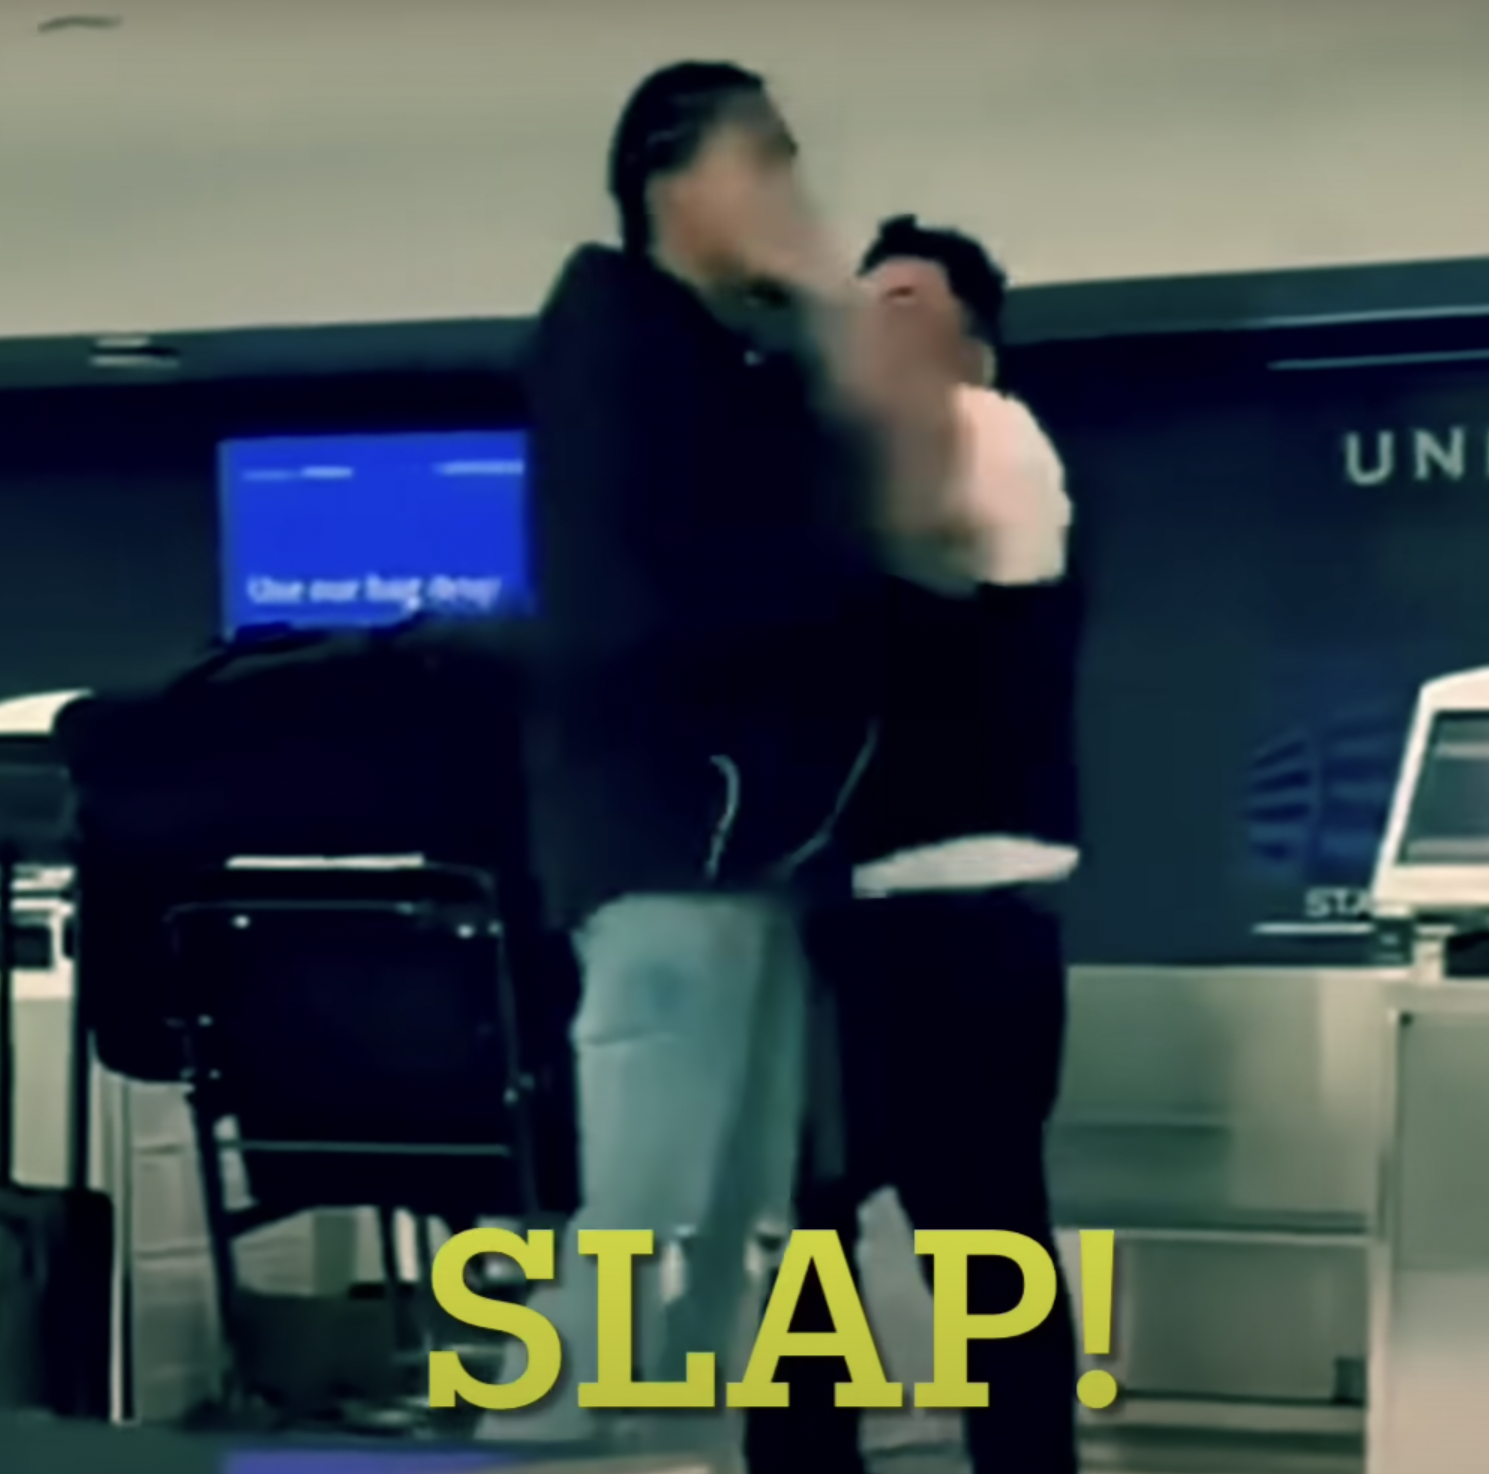 United Airlines fight - standing - "Slap! Un